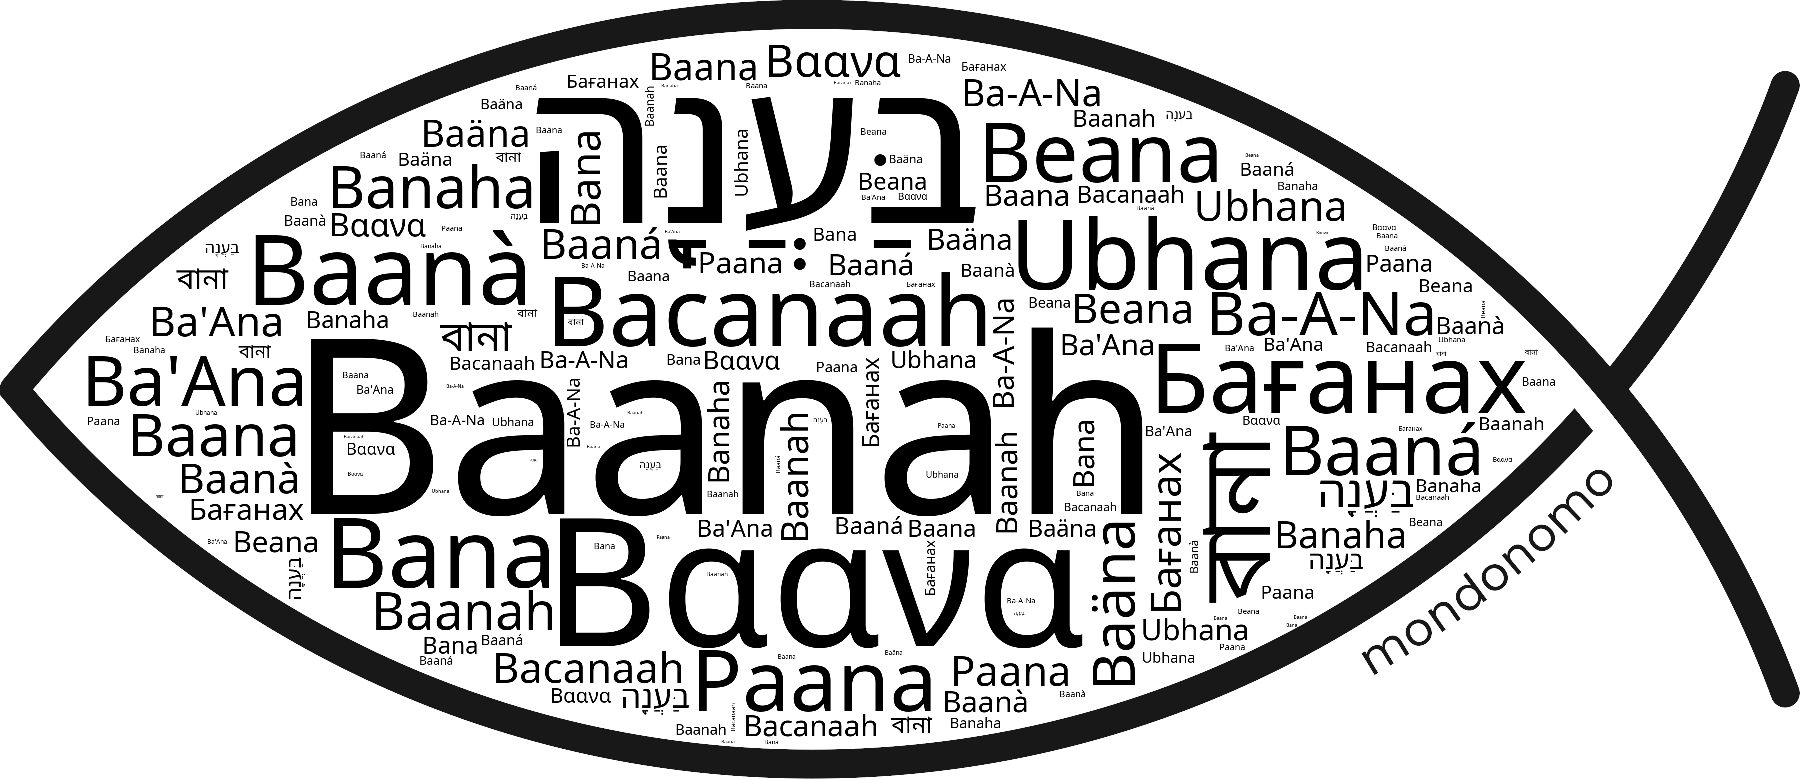 Name Baanah in the world's Bibles